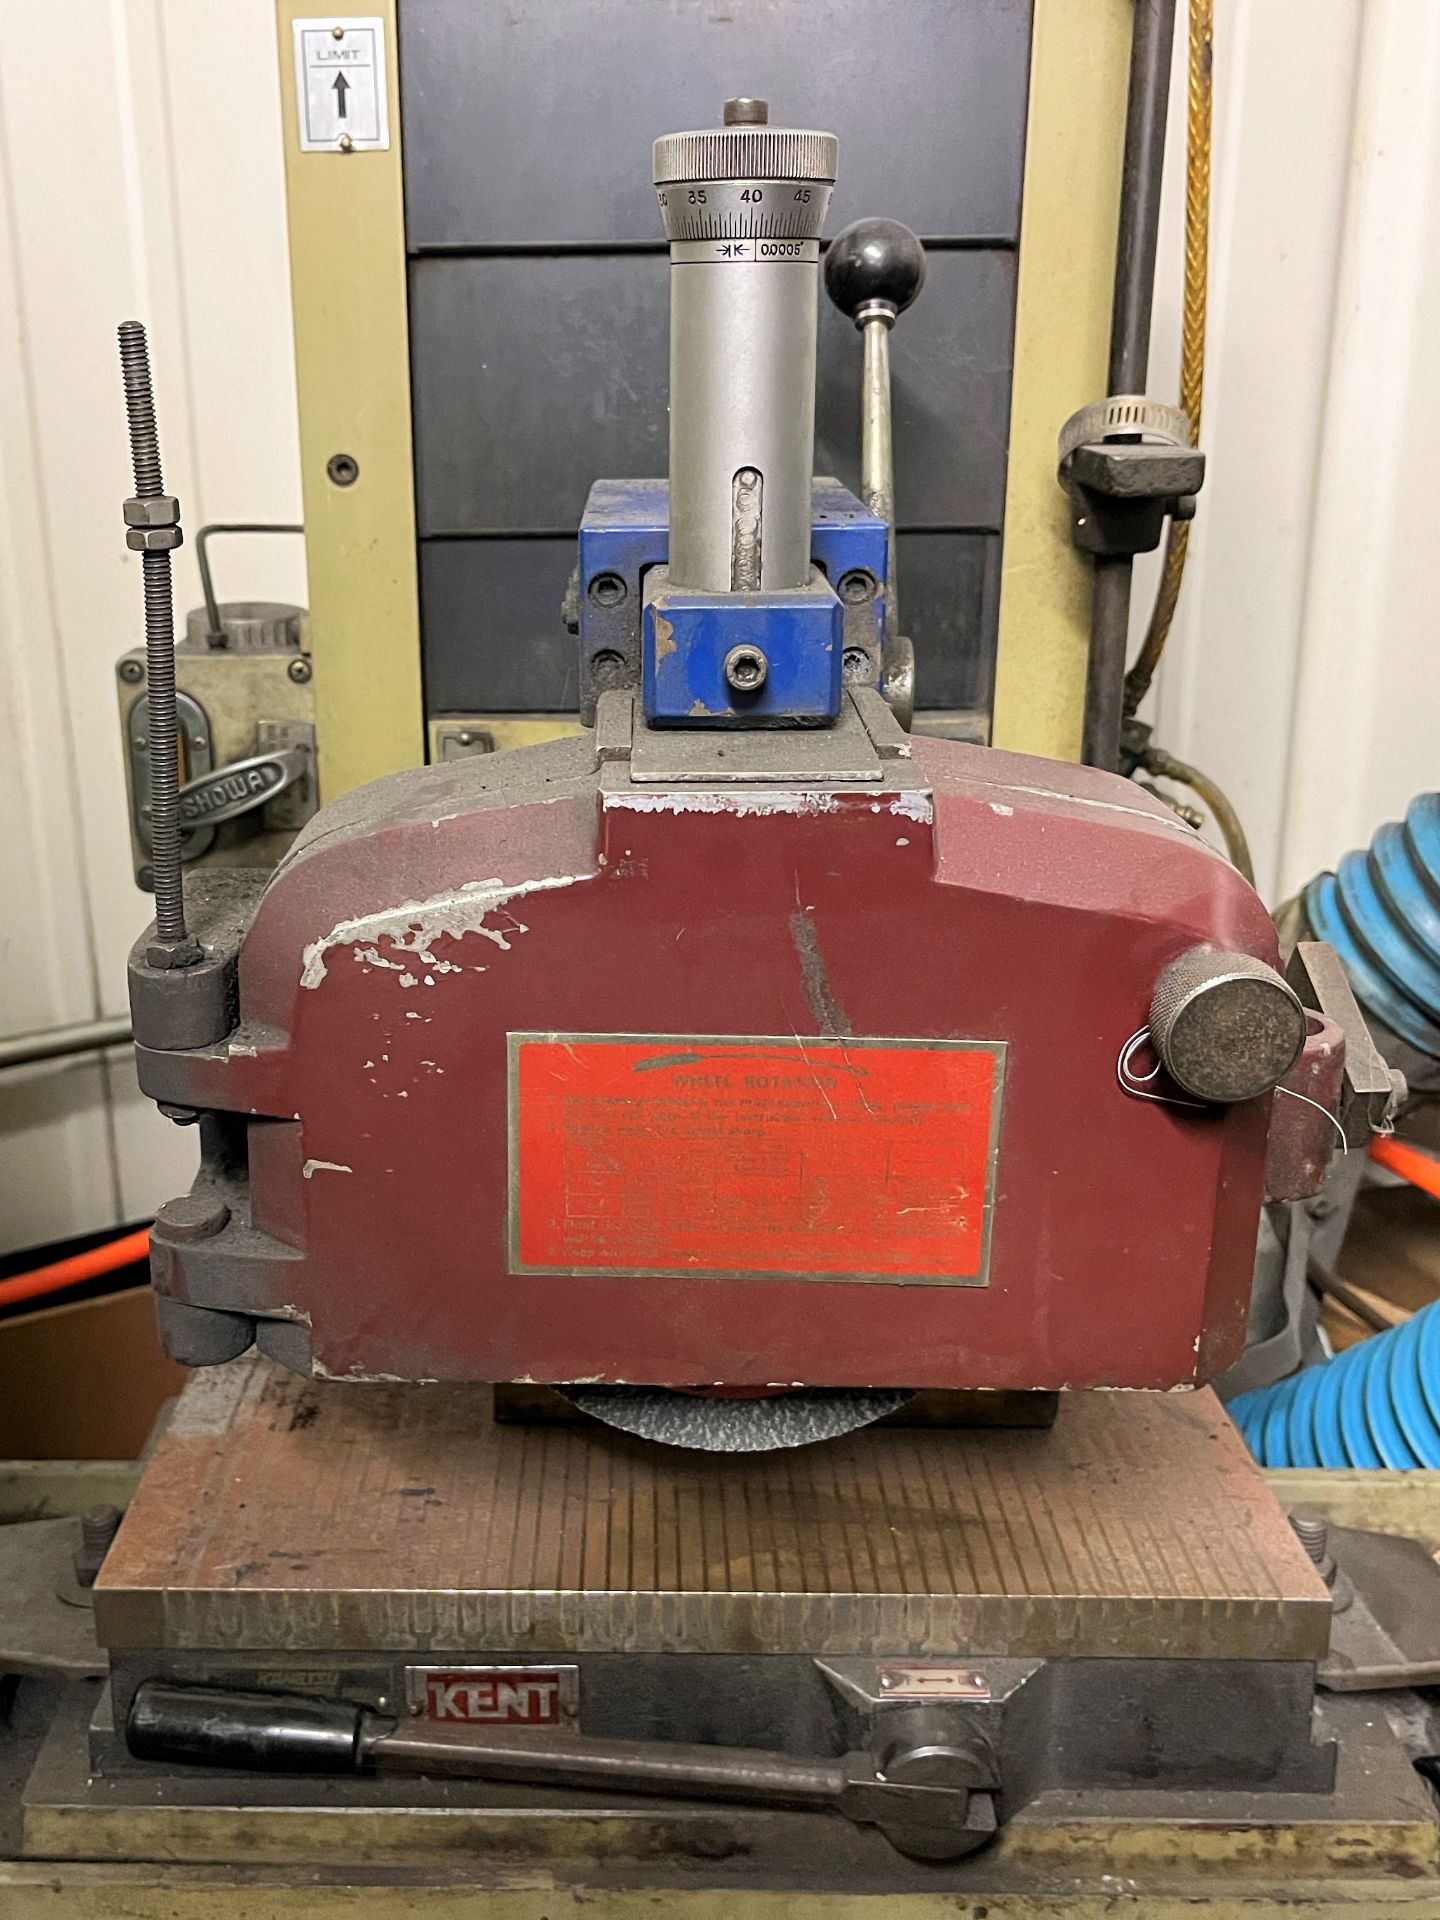 Kent Mod.KGS-200 Hand Feed Surface Grinder - S/N 90084203, 6" x 14" Magnetic Chuck, 8" x 1" Wheel - Image 2 of 2